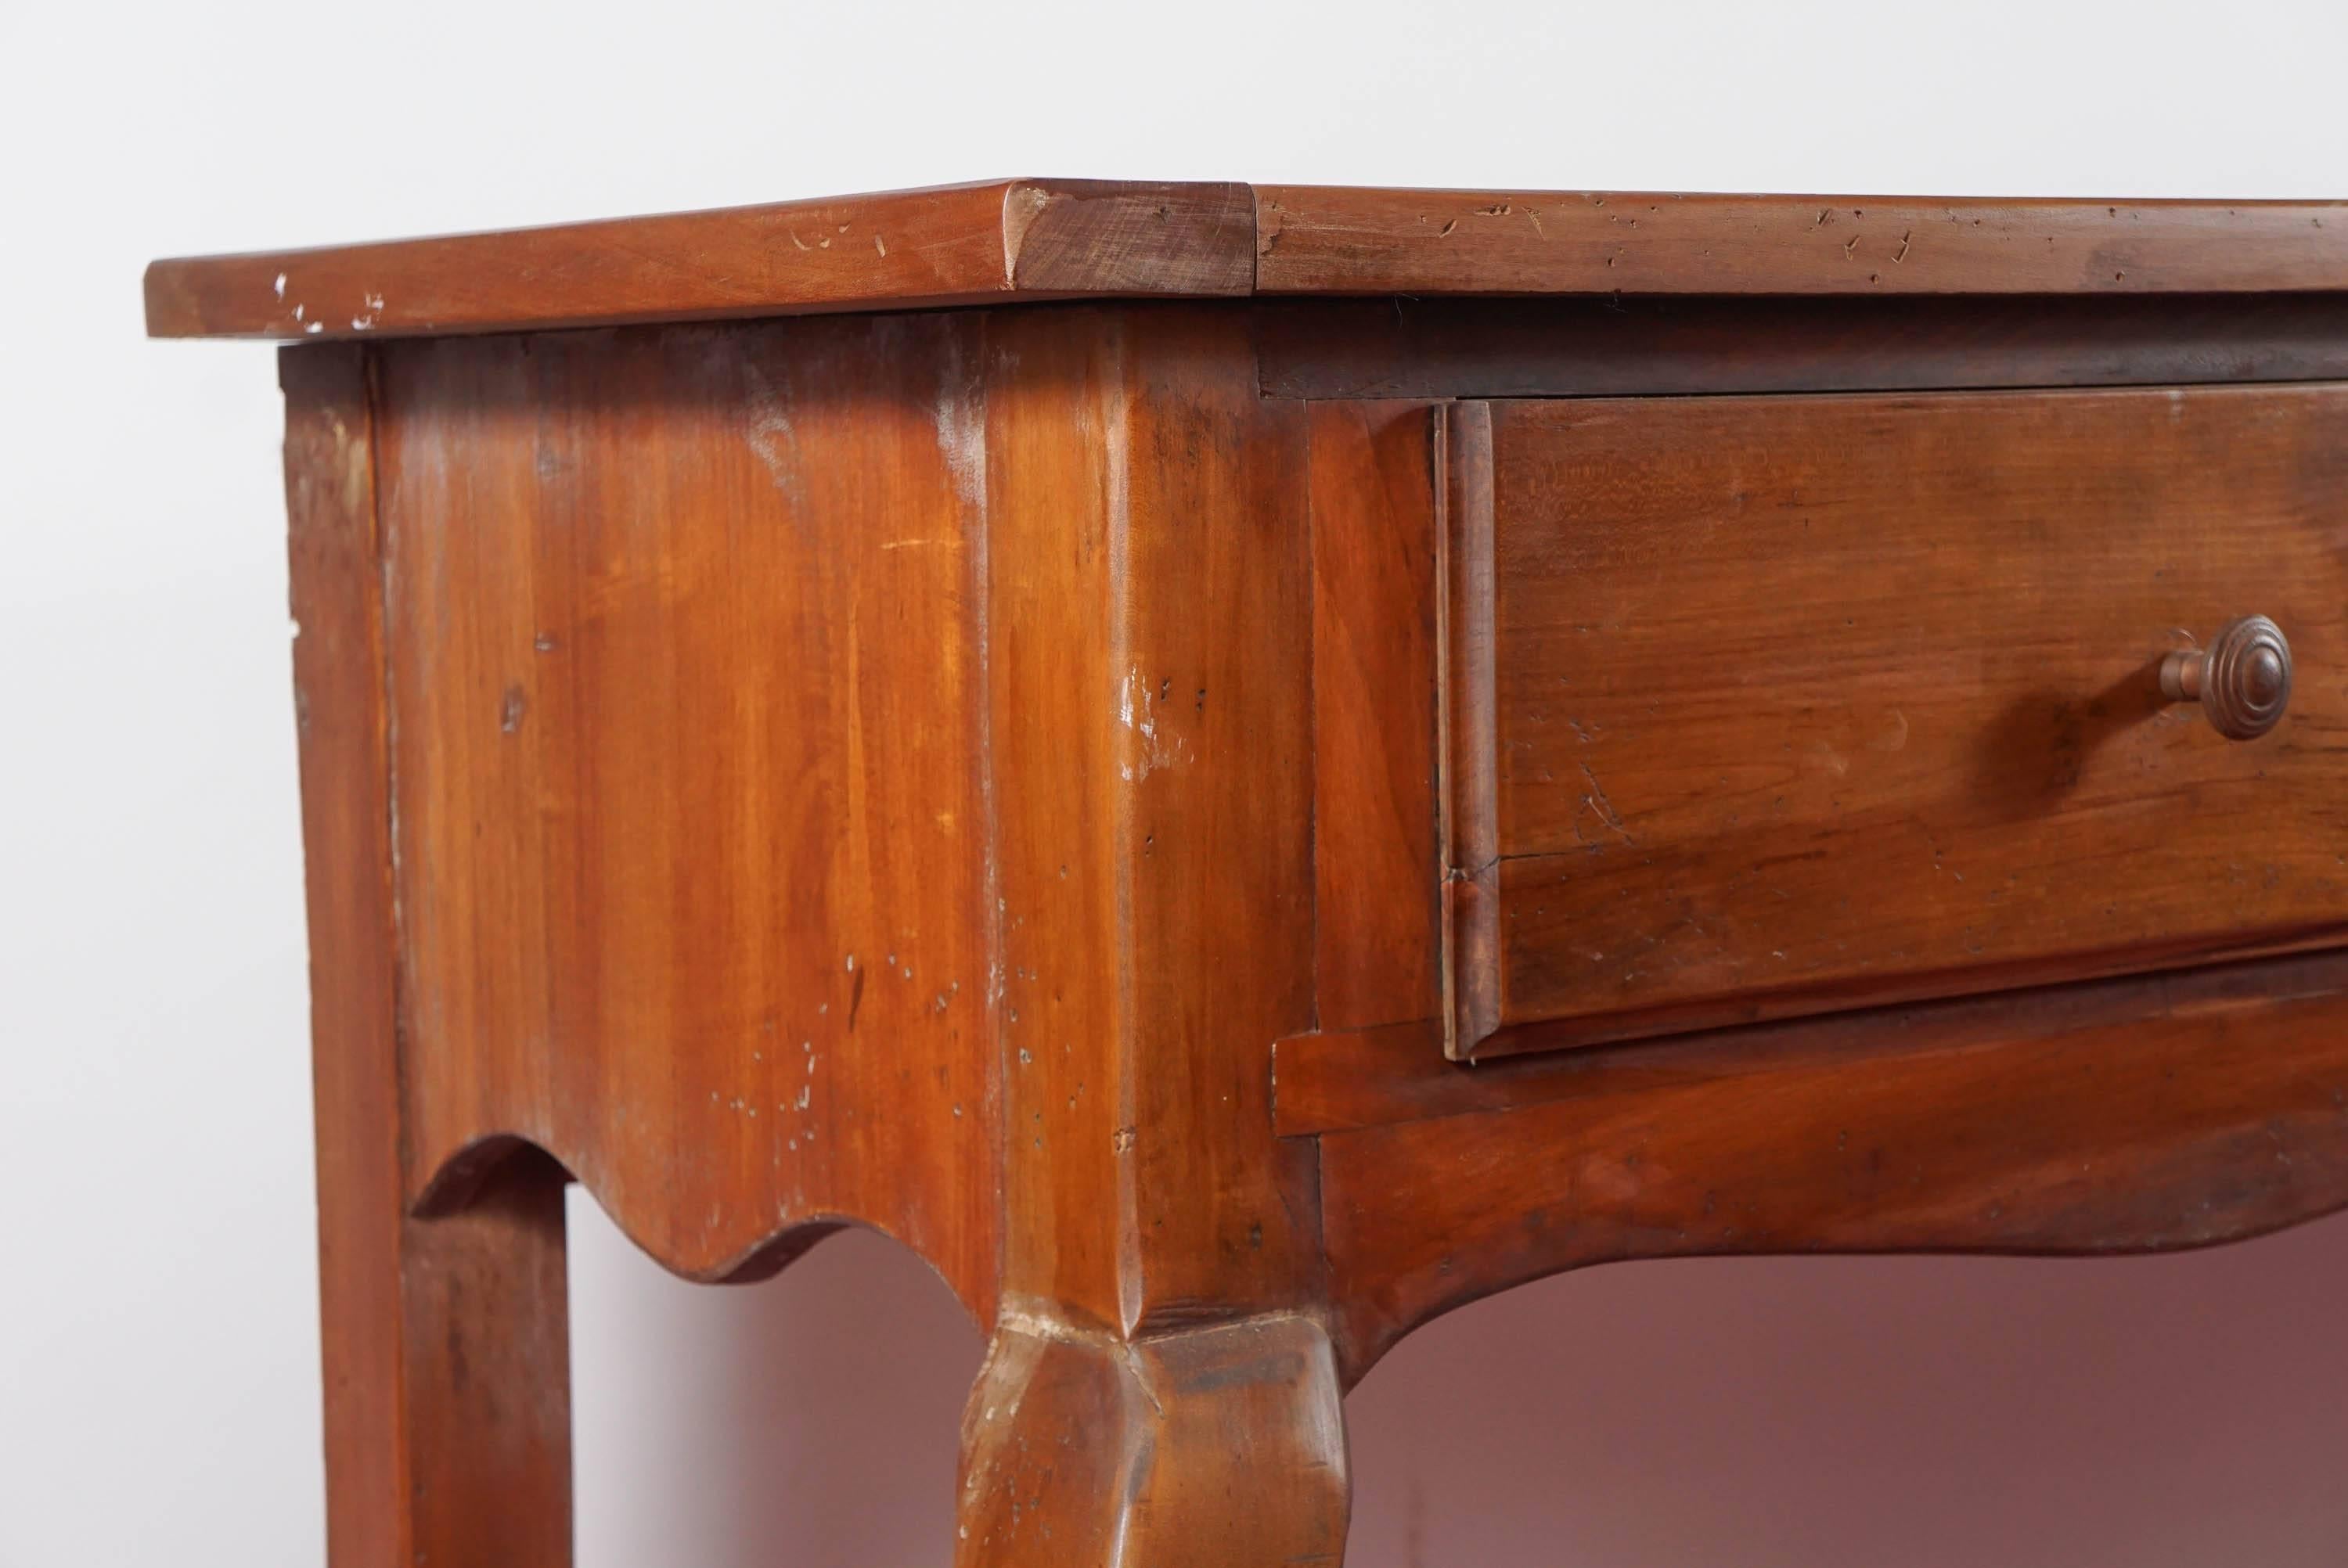 Hand-Crafted French Provincial-Style Sideboard or Server